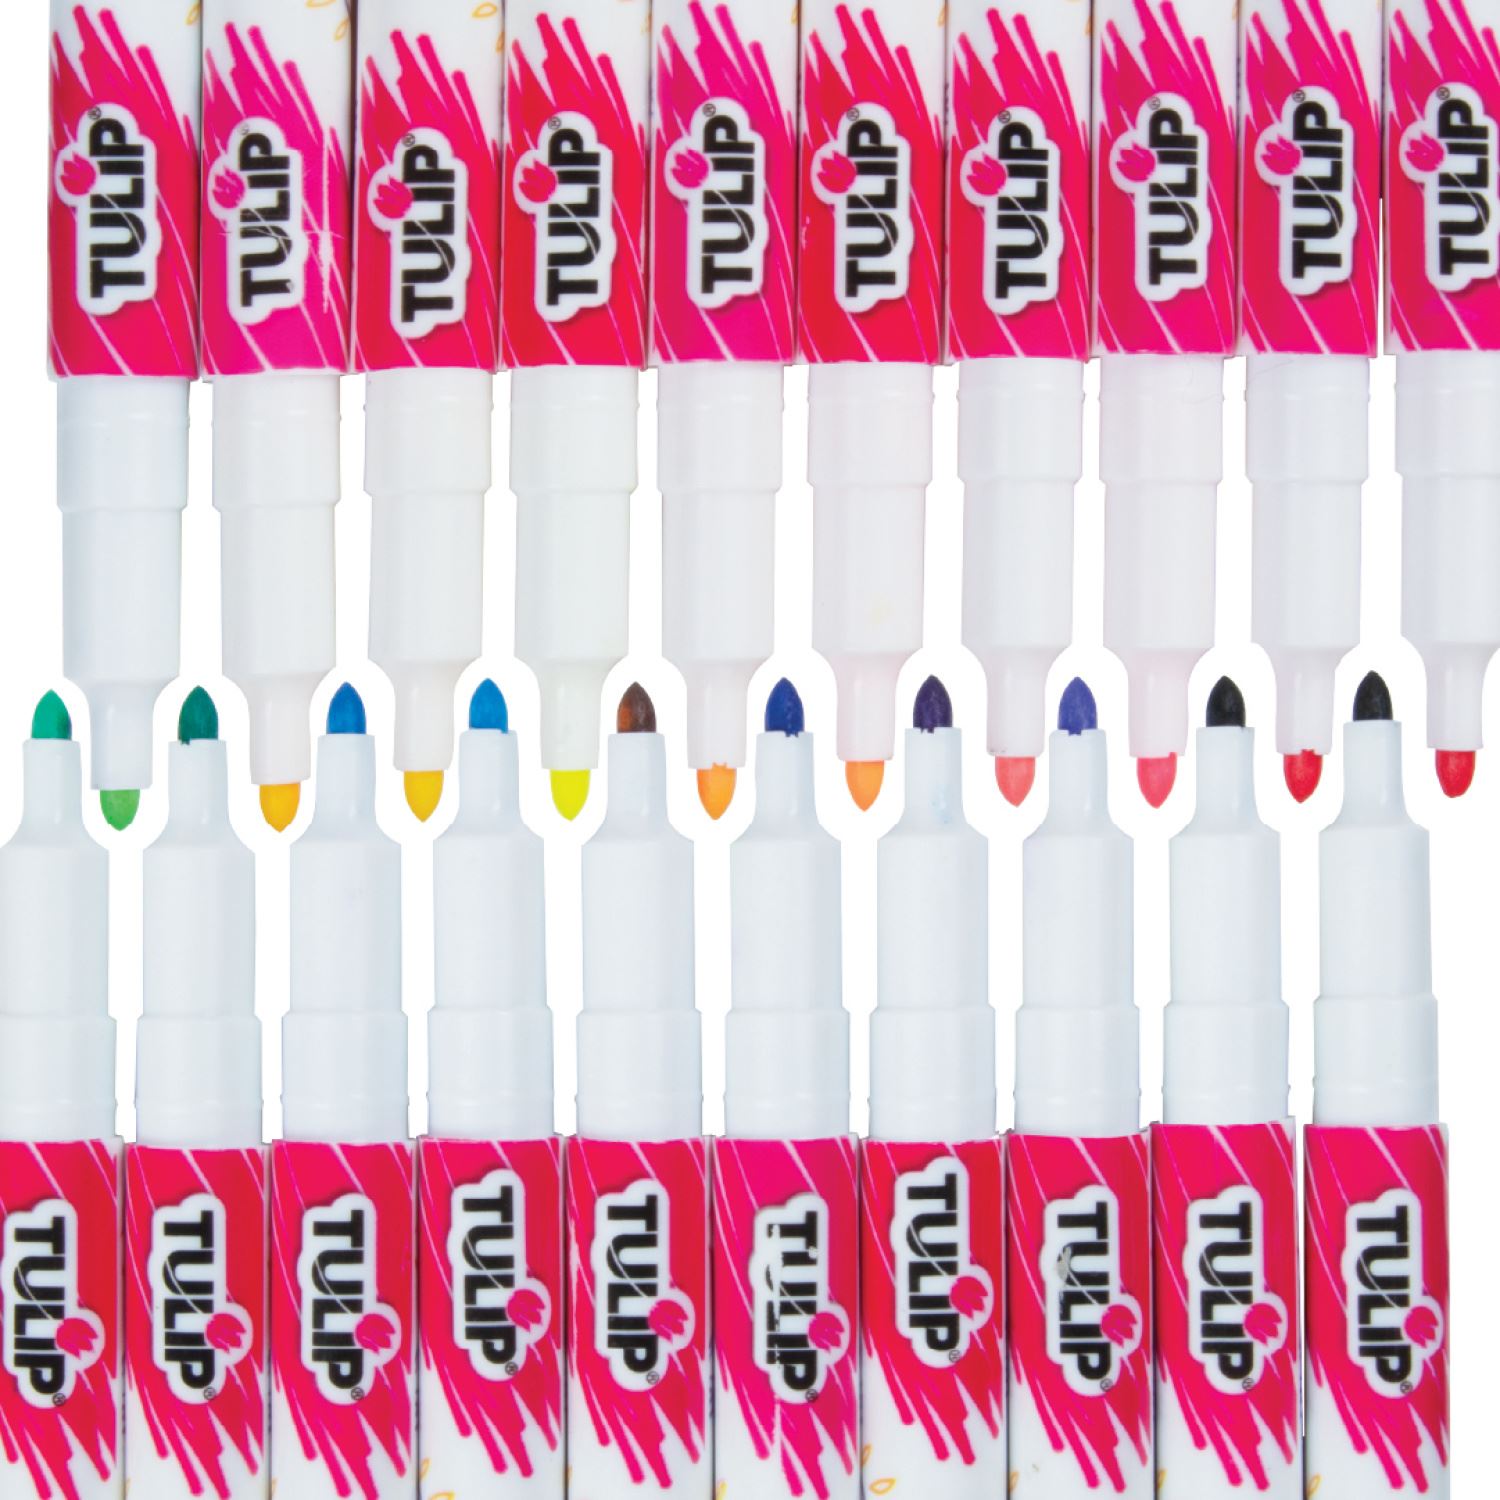 Picture of 28976 Tulip Fine-Tip Fabric Markers Rainbow 20 Pack